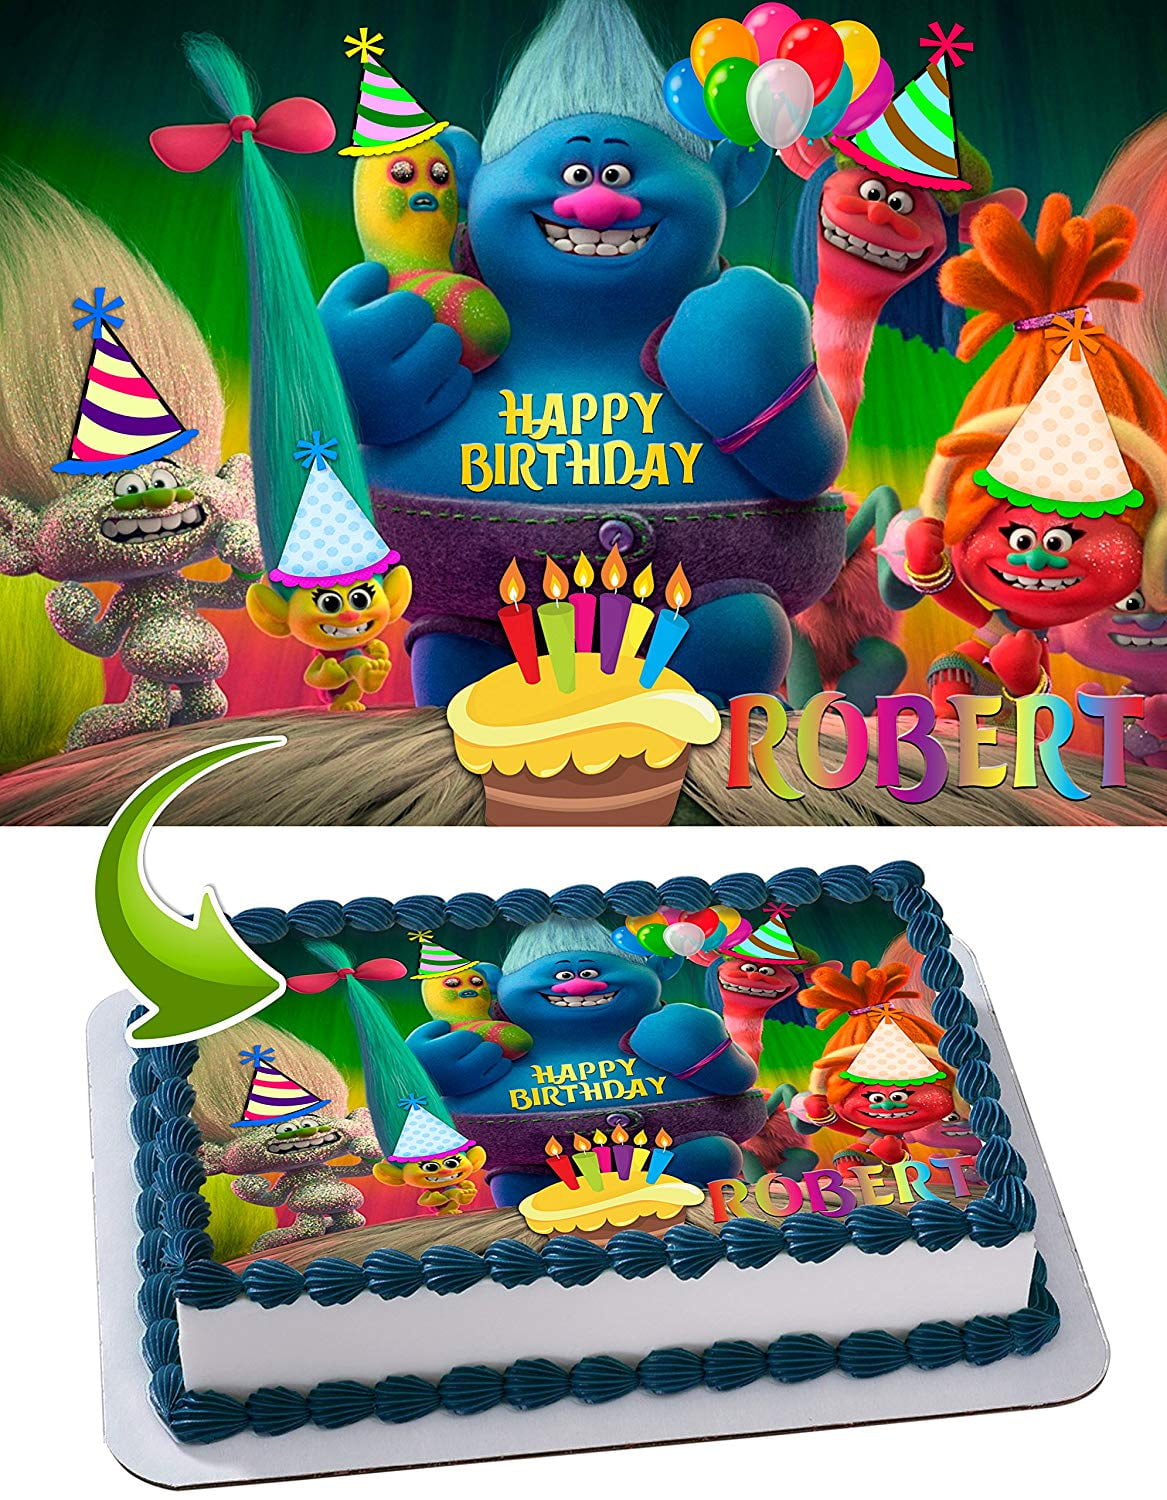 Trolls Themed Party Cake Decorations Happy Birthday Cake Topper and Cardstock Trolls Cupcake Toppers Kids Birthday Cake Decoration Baby Shower Party Supplies ANGOLIO 49Pcs Trolls Cake Toppers